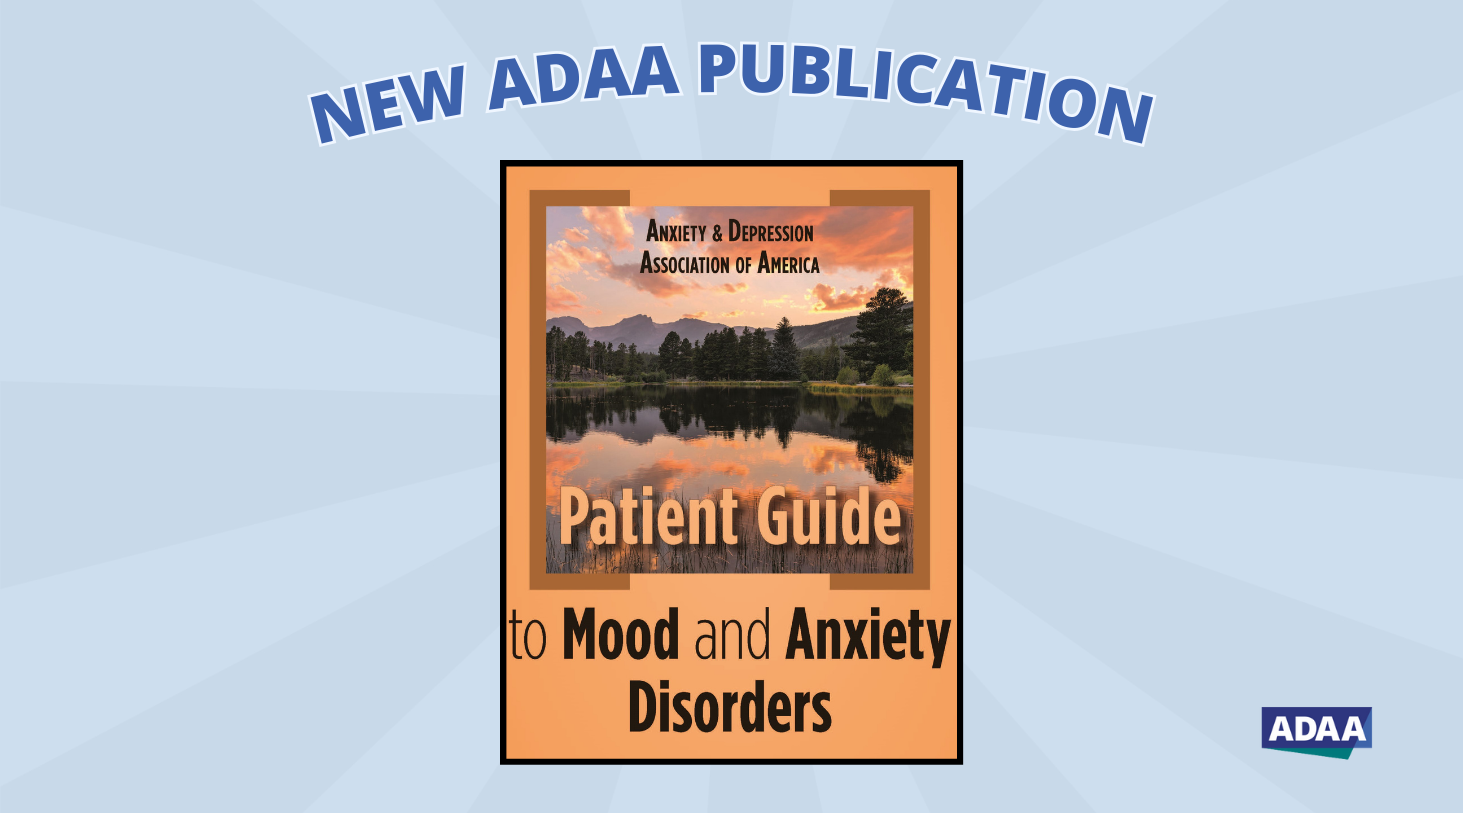 ADAA Patient Guide to Mood and Anxiety Disorders